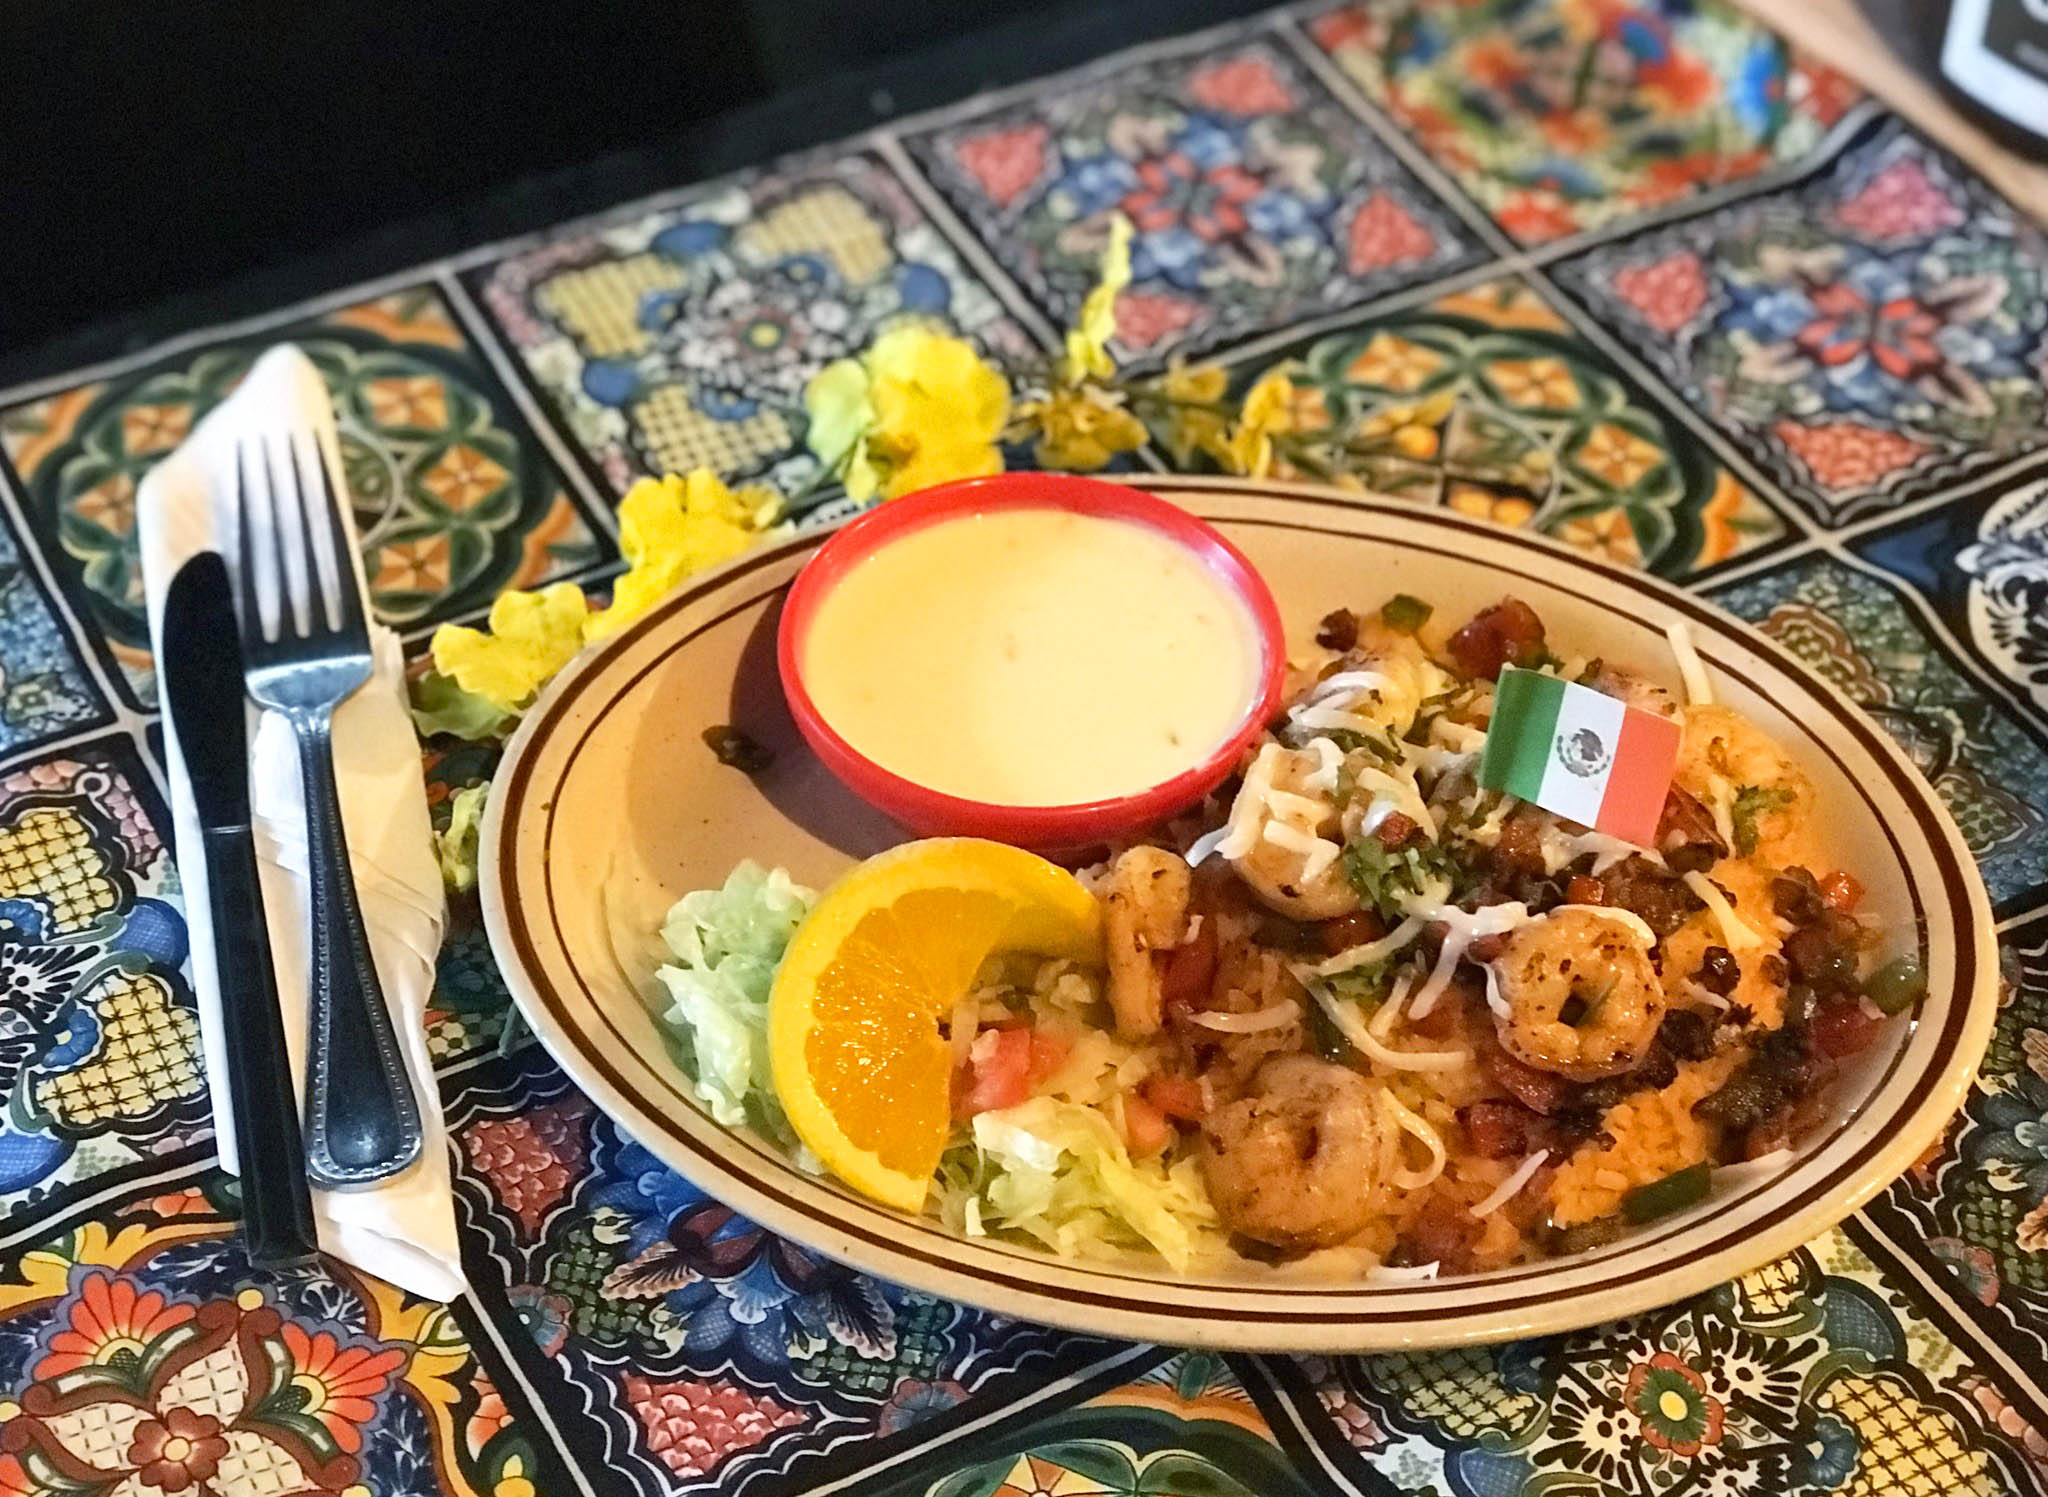 Shrimp dish at Tortuga Mexican Bar and Grill in Gold Beach, Oregon